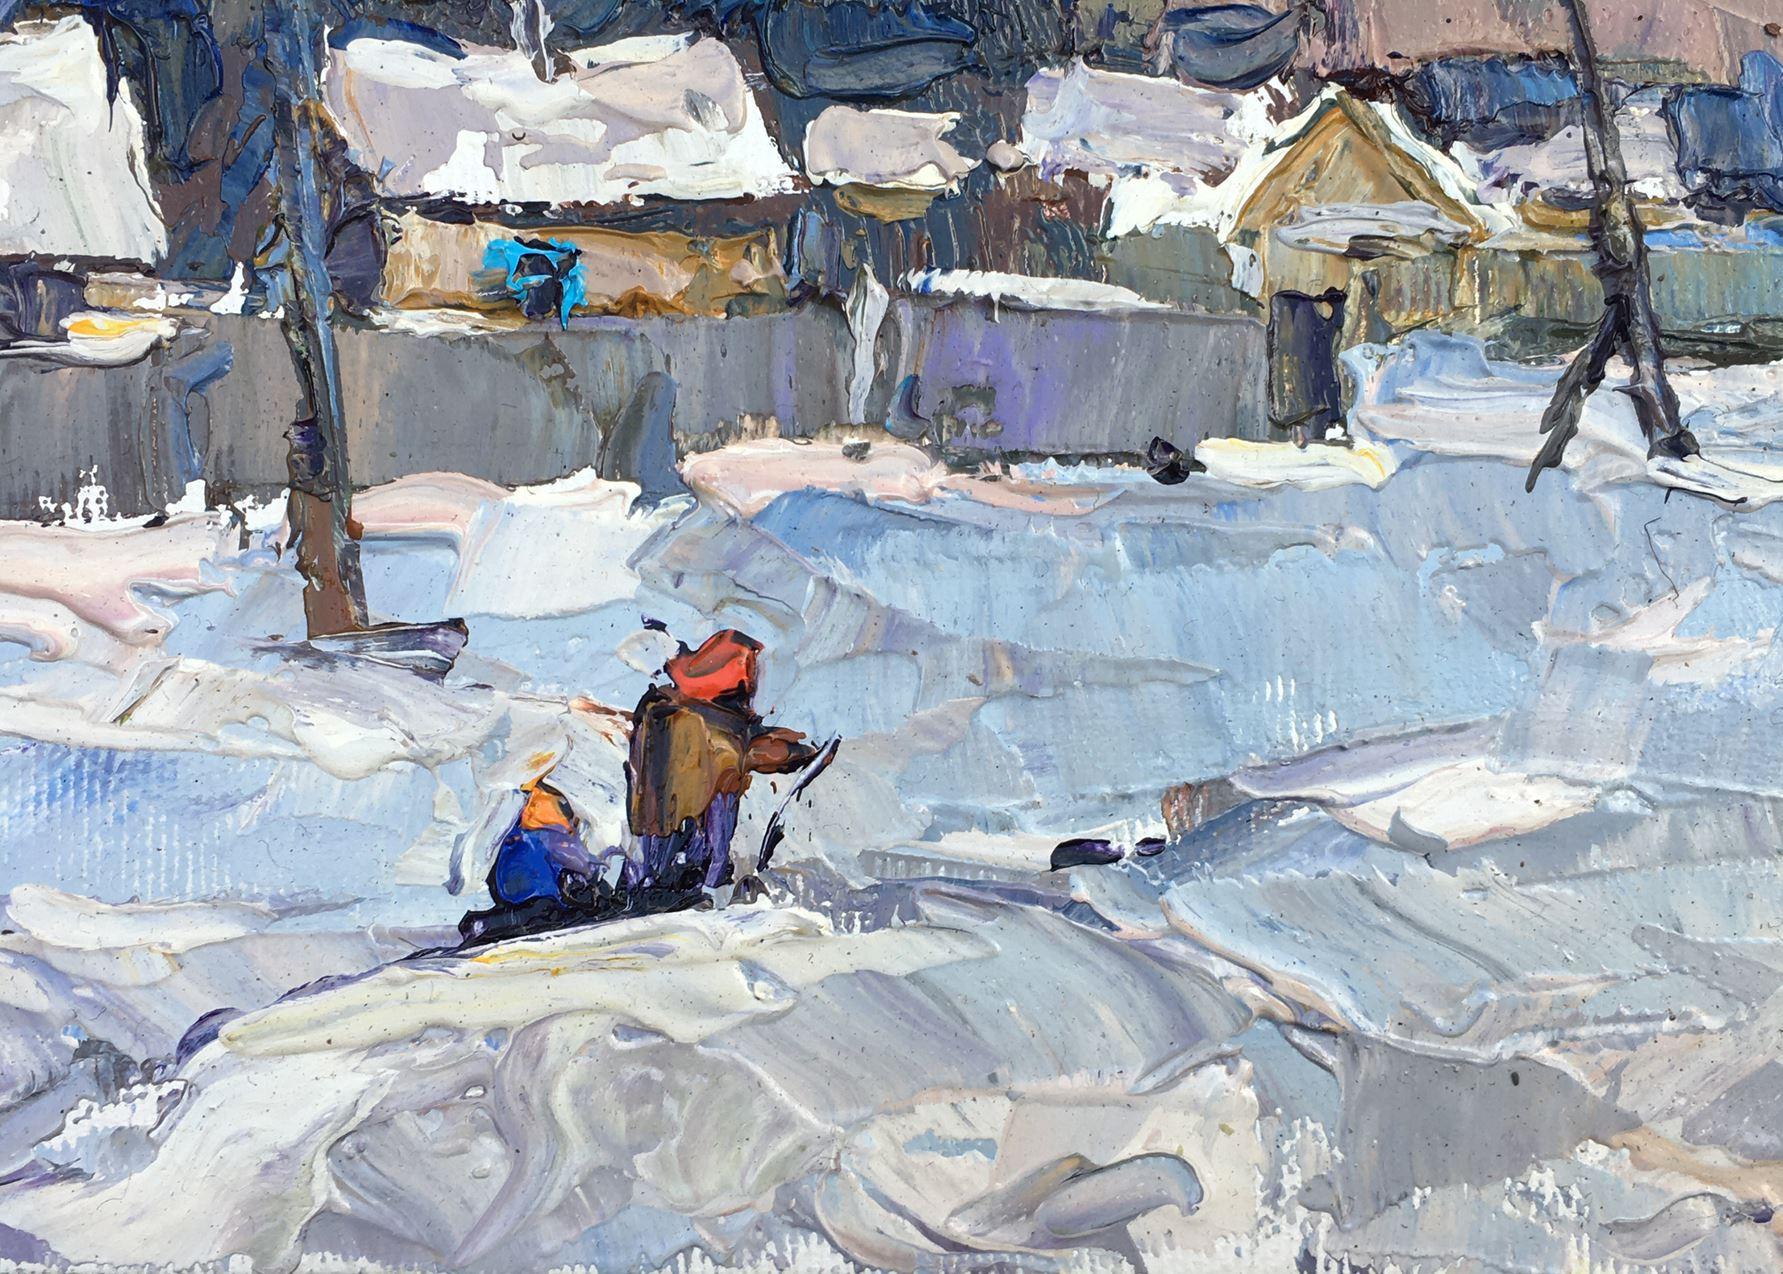 Artist: Alex Kalenyuk 
Work: Original oil painting, handmade artwork, one of a kind 
Medium: Oil on canvas 
Year: 2021
Style: Impressionism
Title: Street in the Snow
Size: 6